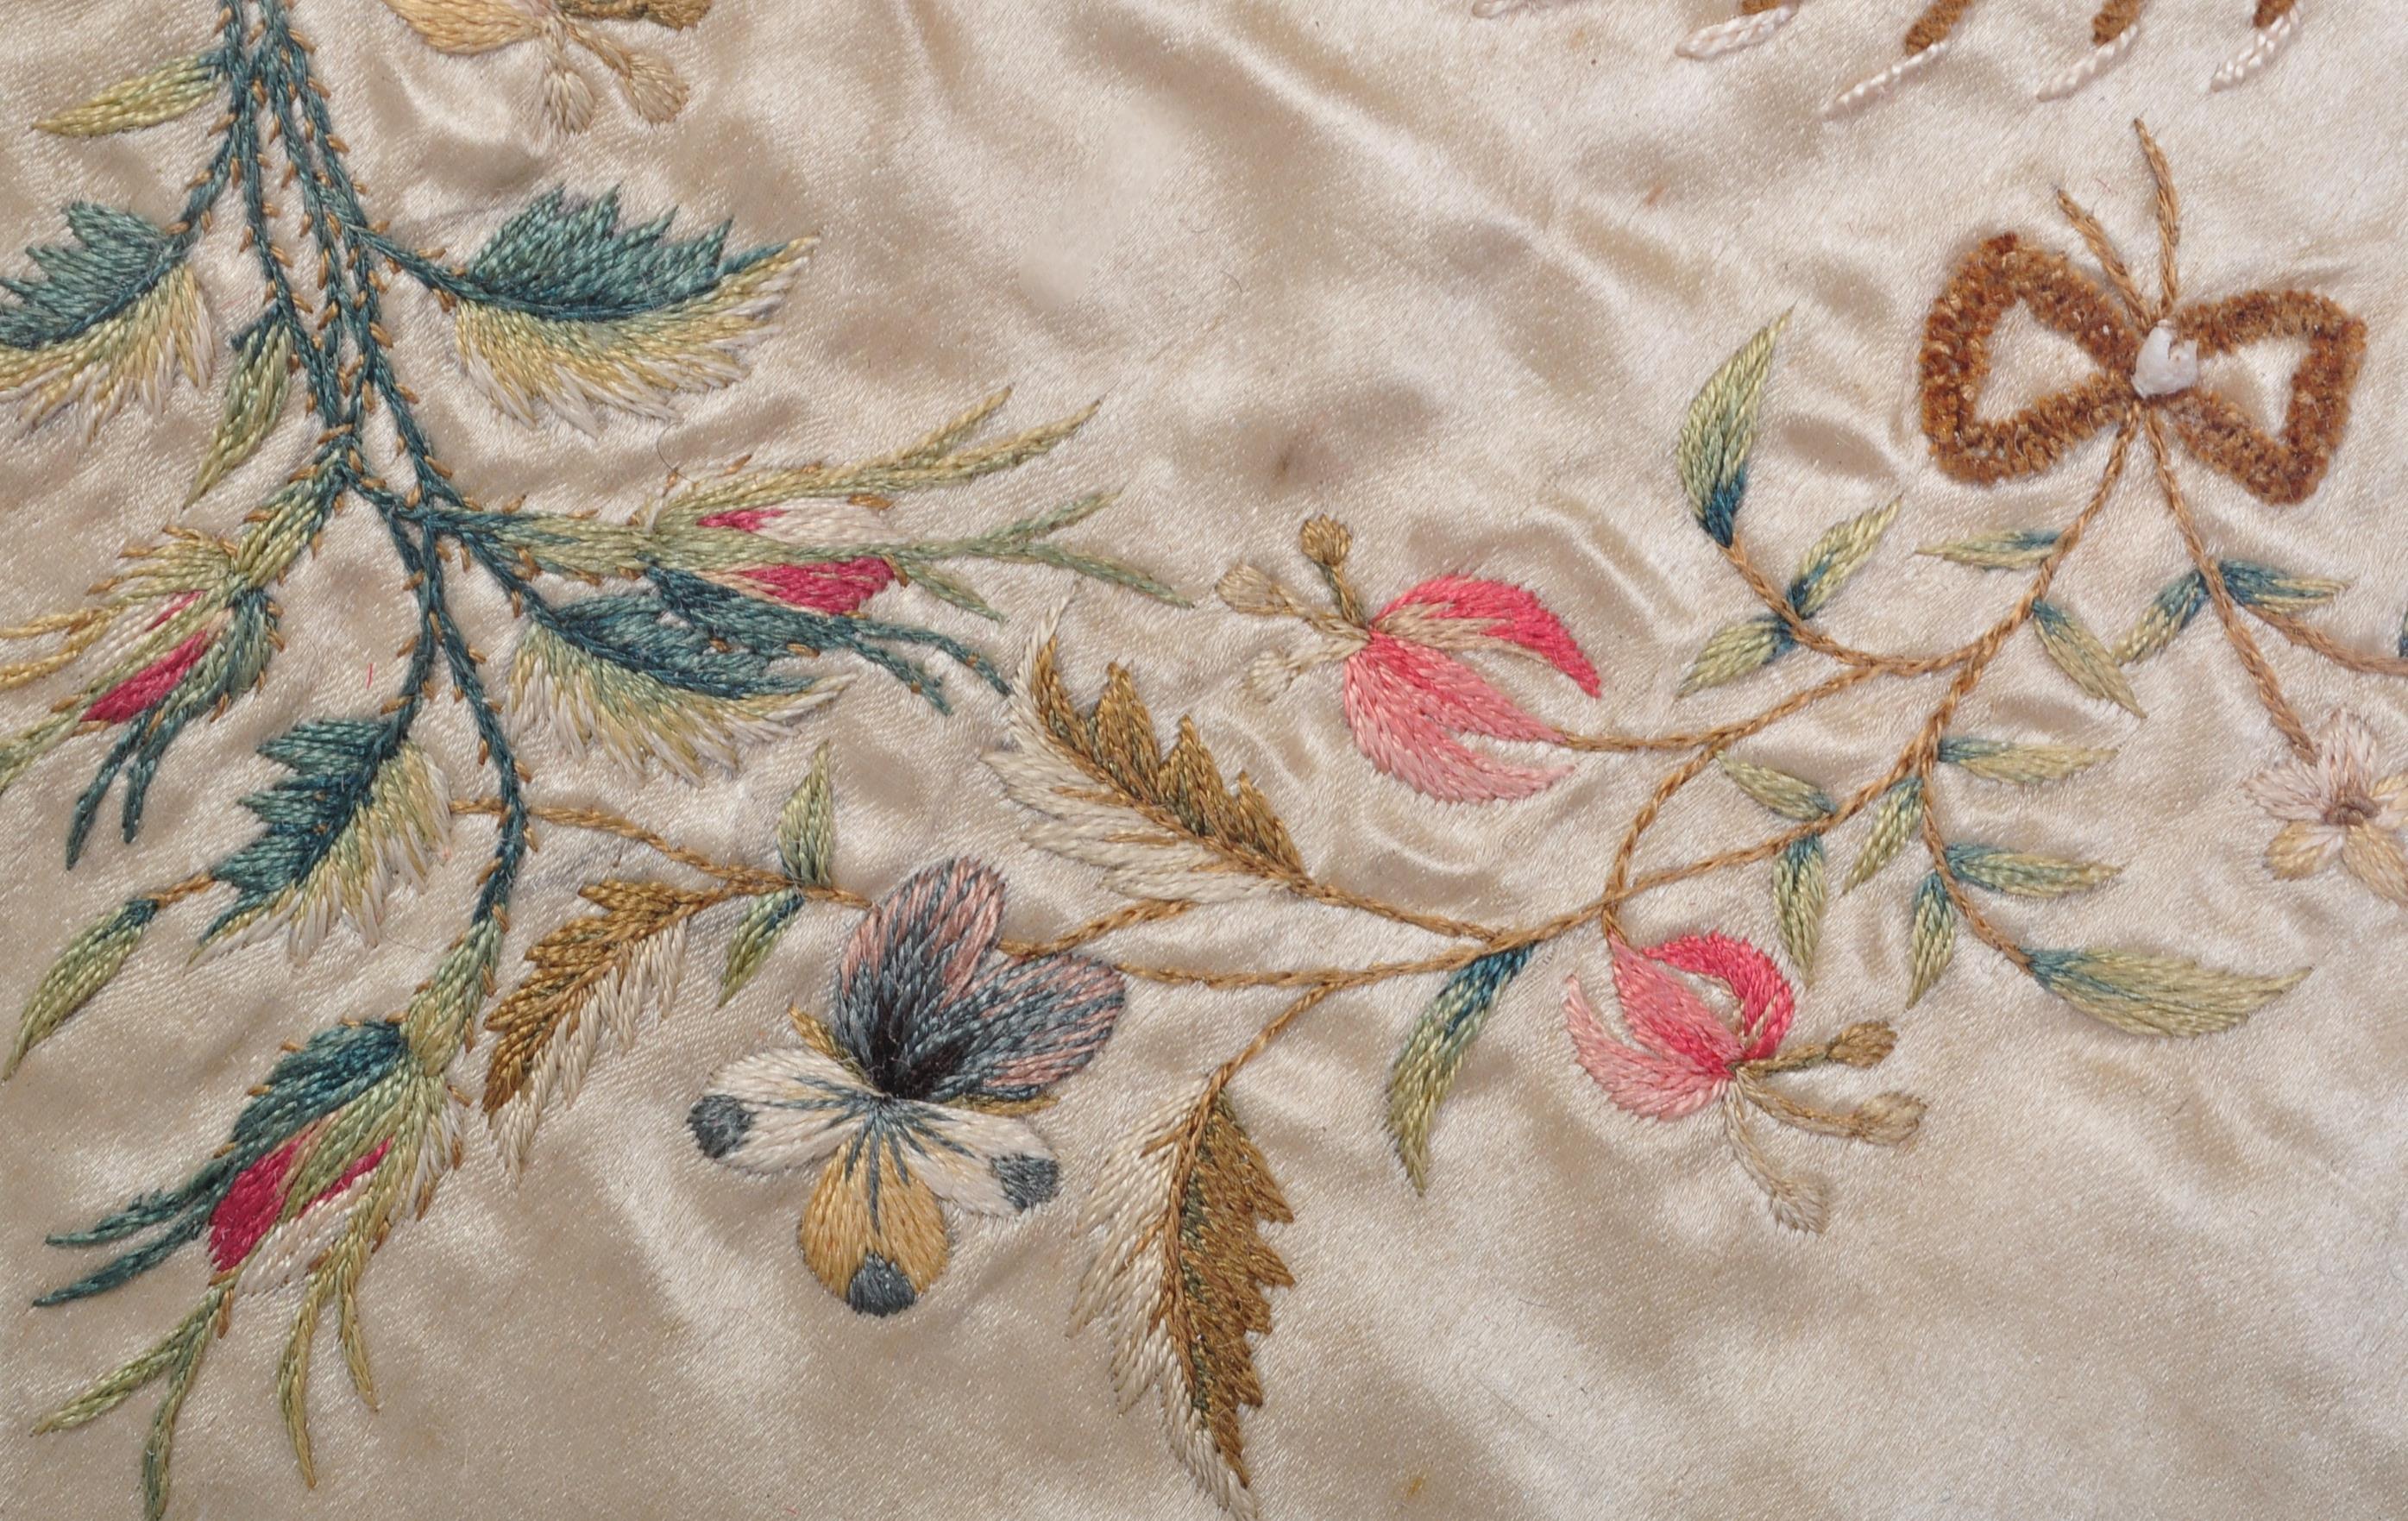 19TH CENTURY EMBROIDERED INITALS ON SILK PANEL - Image 6 of 7